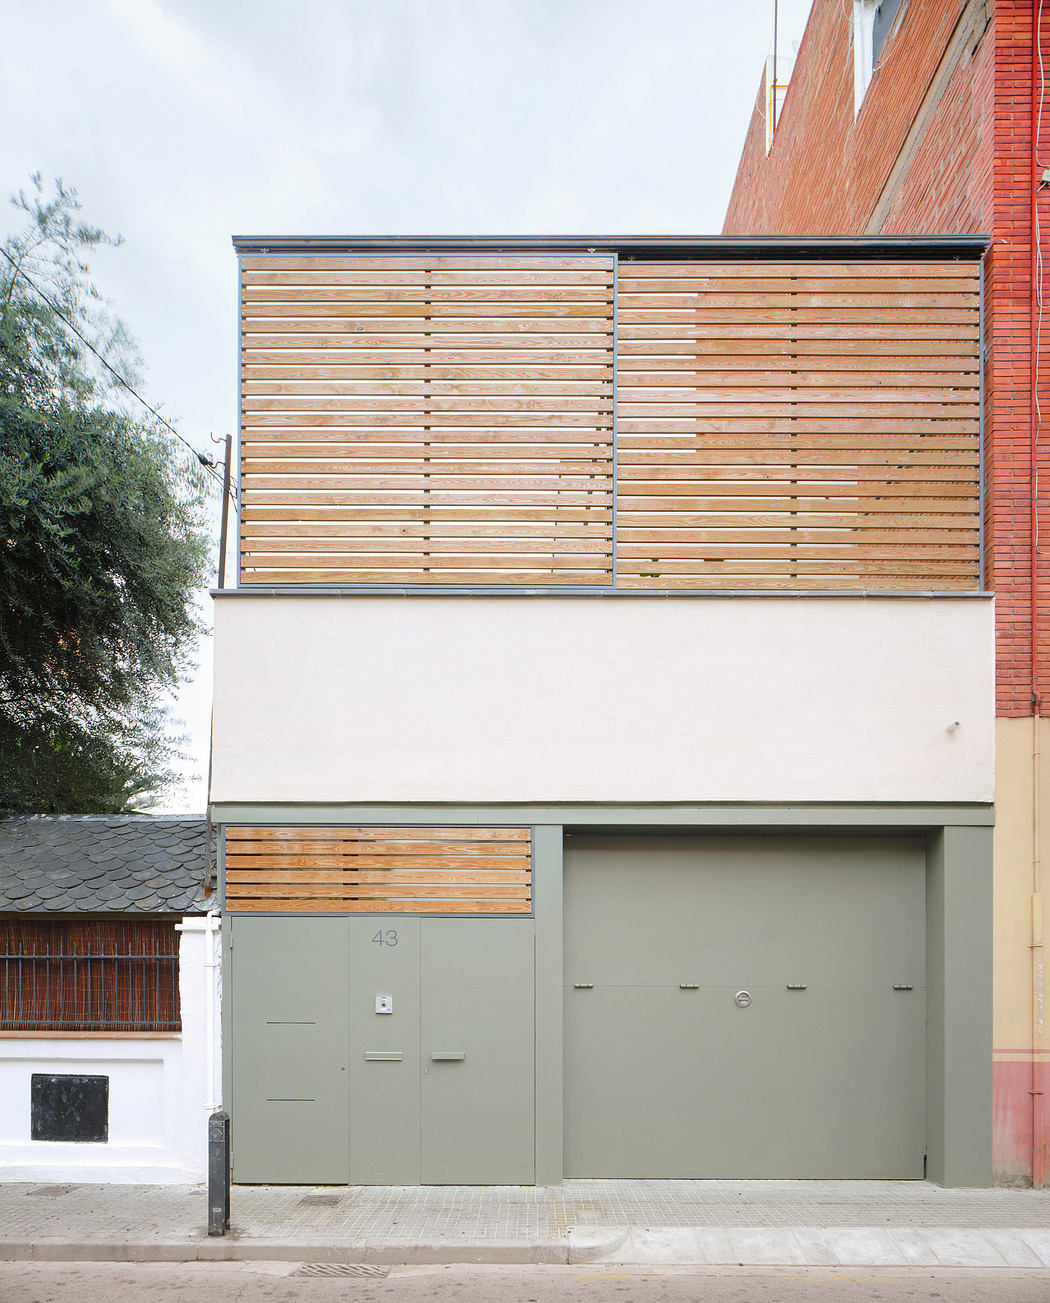 Modern two-story building facade with wooden slat upper level and gray garage.